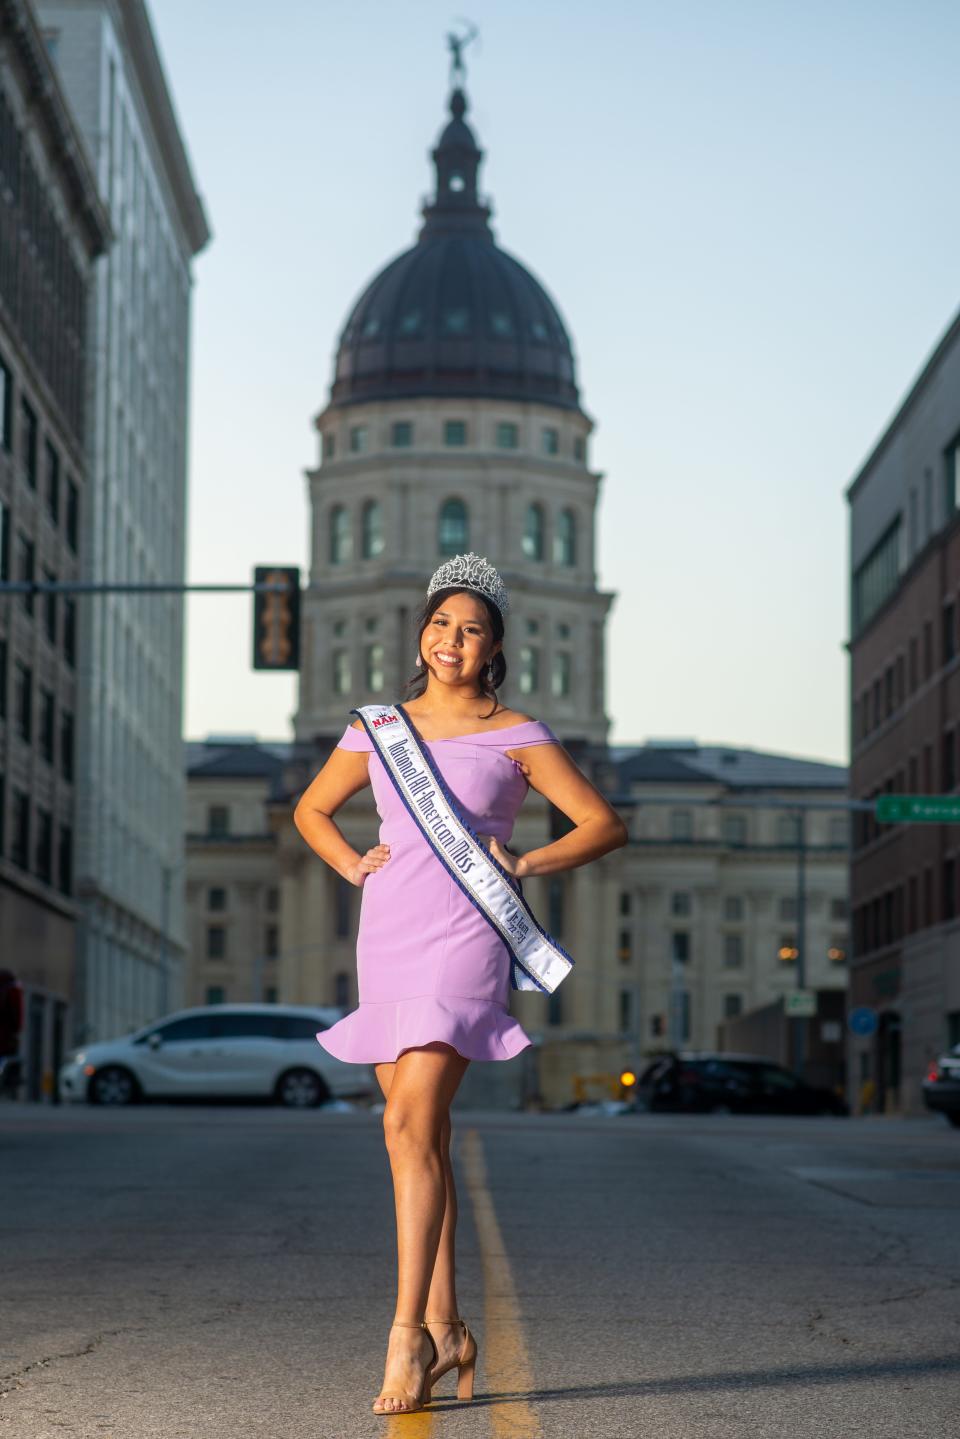 Seaman High School junior Madison Wabaunsee poses with her National All-American Miss Jr. Teen tiara and sash in the middle of S.E. 9th Street on Friday in downtown Topeka.